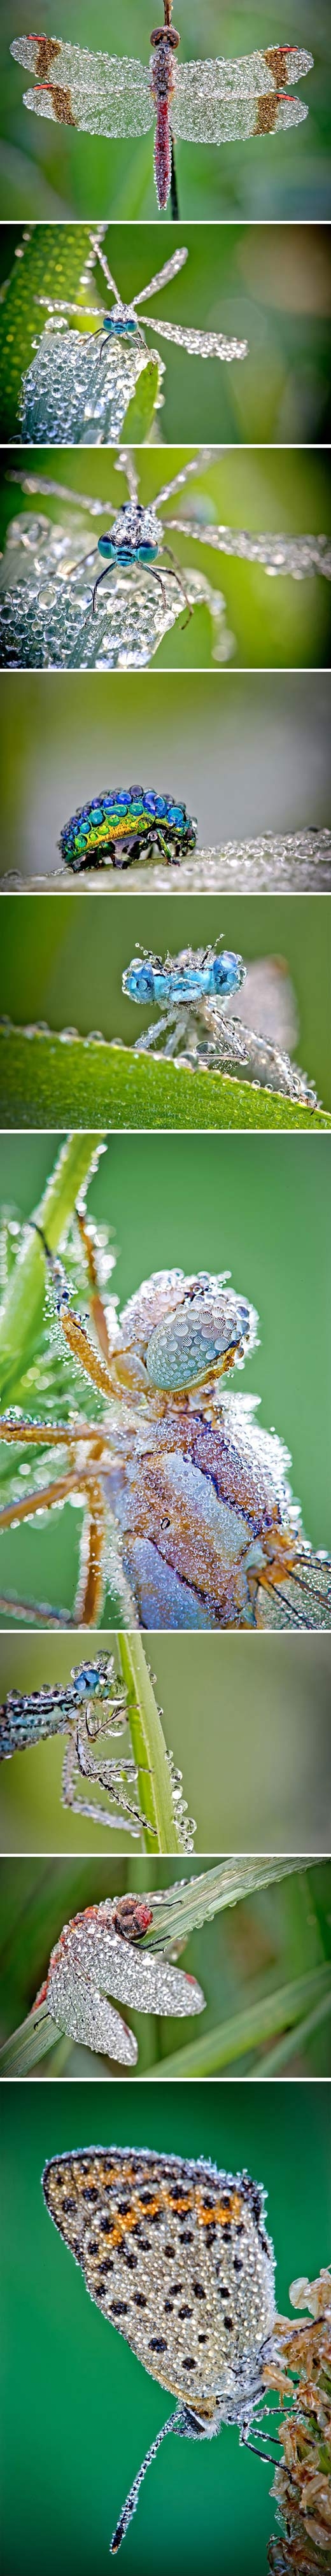 Insects with water drops.